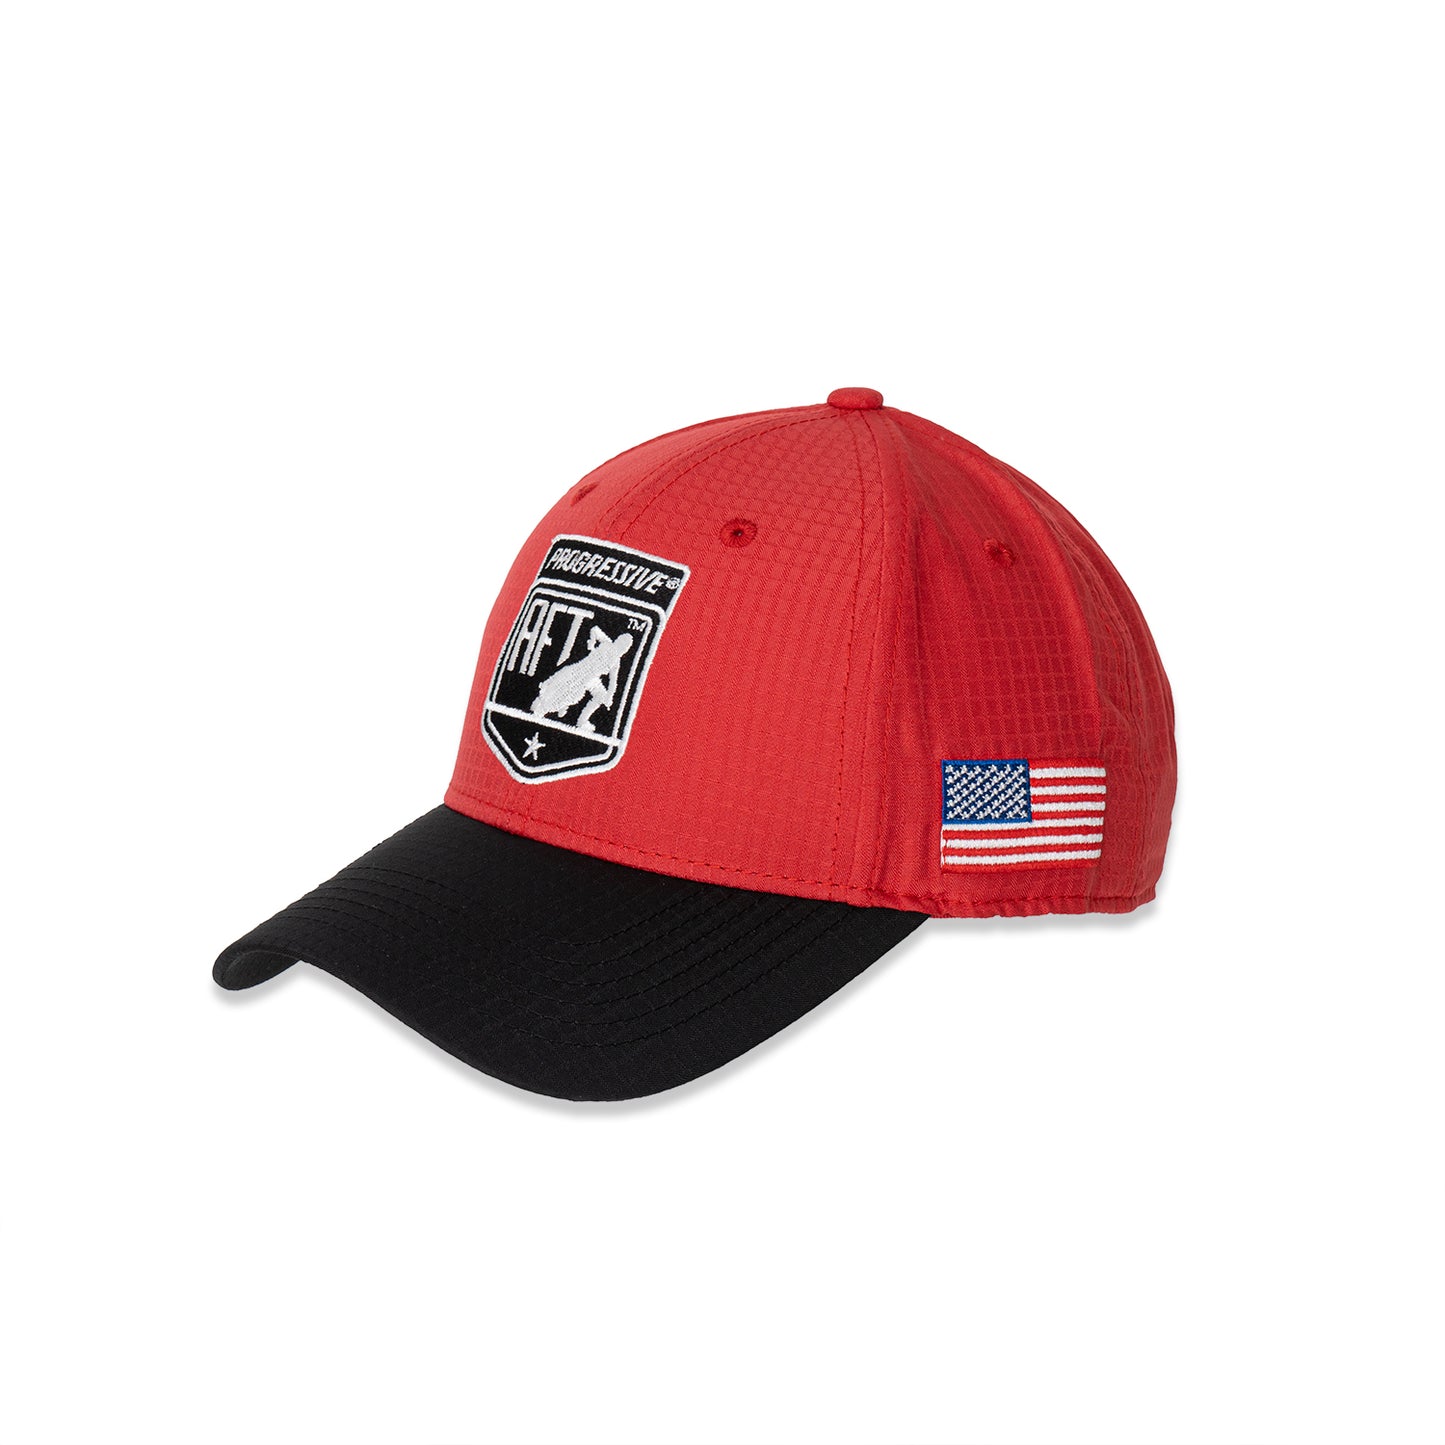 American Flat Track Ripstop Hat - Red/Black